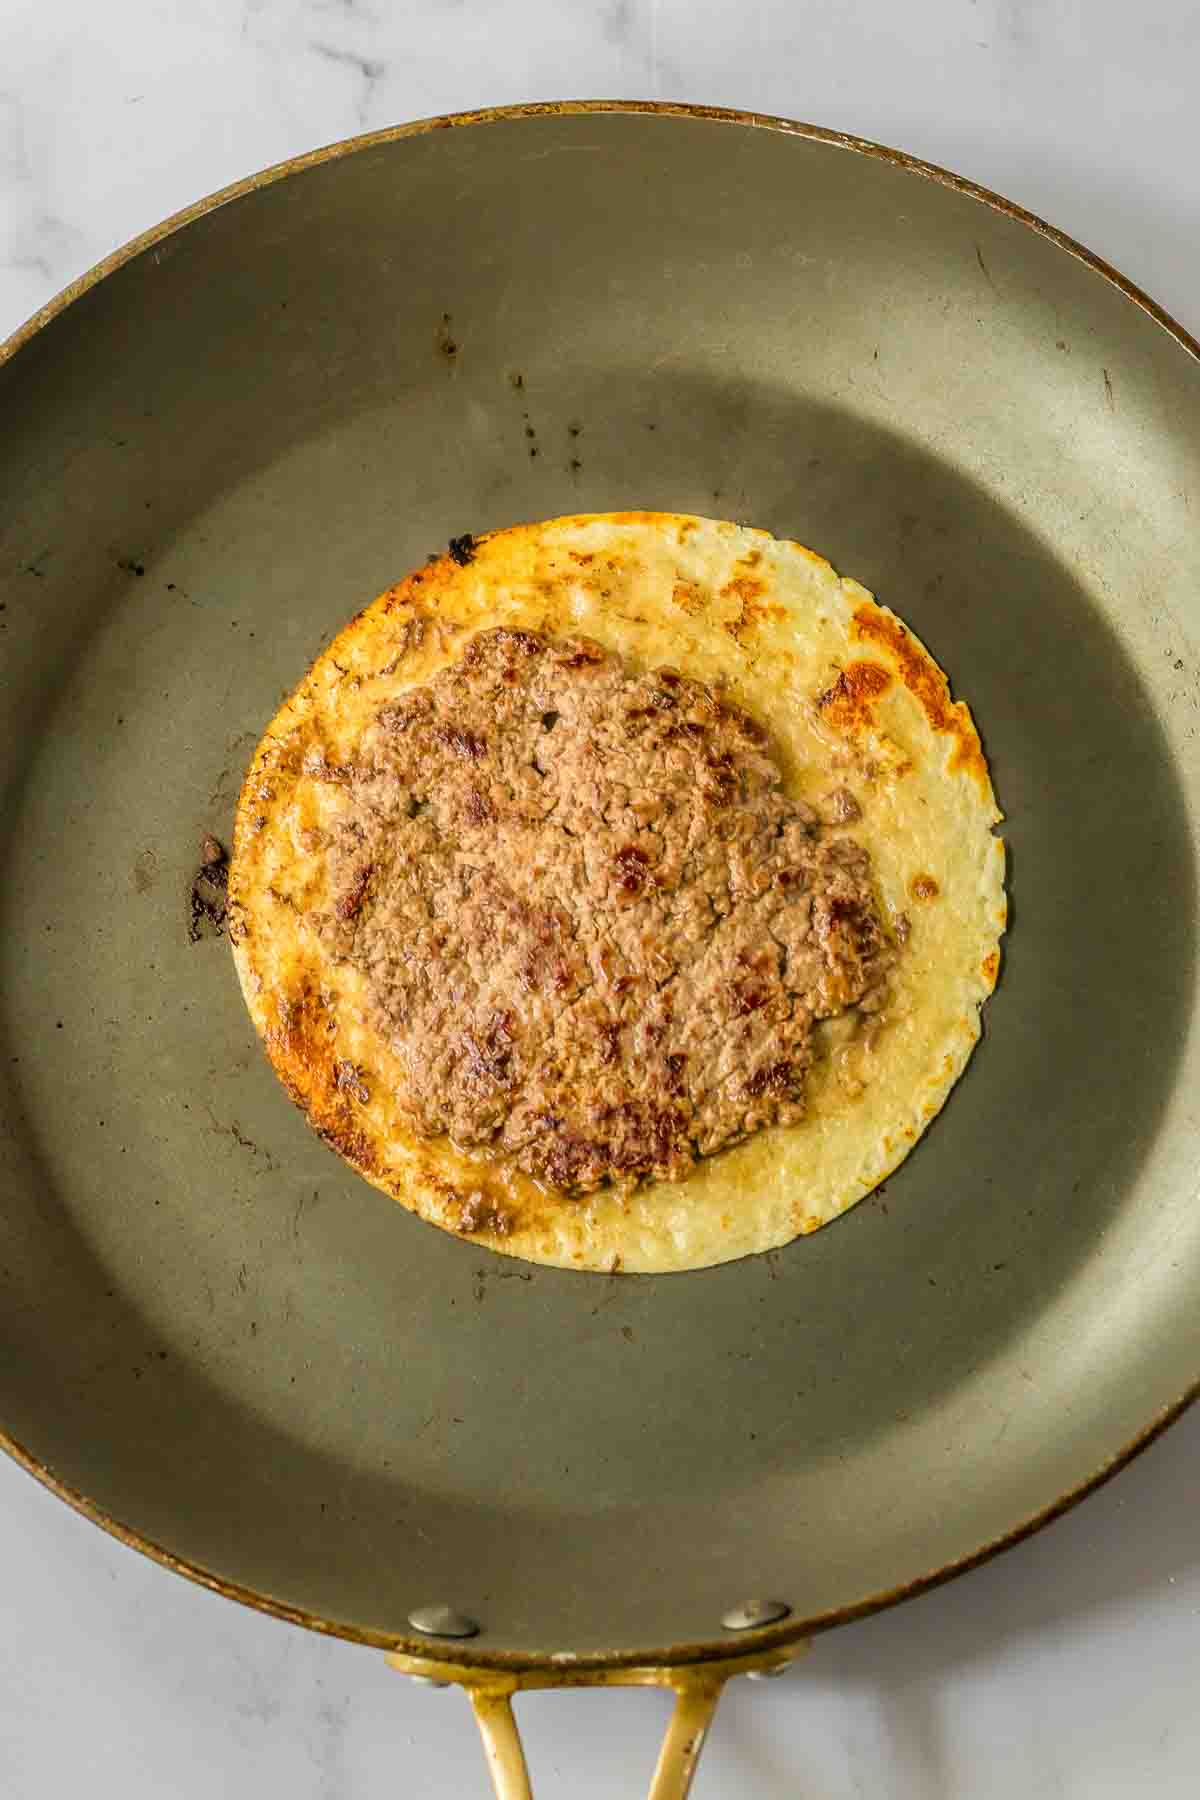 A frying pan cooking a tortilla with ground beef.